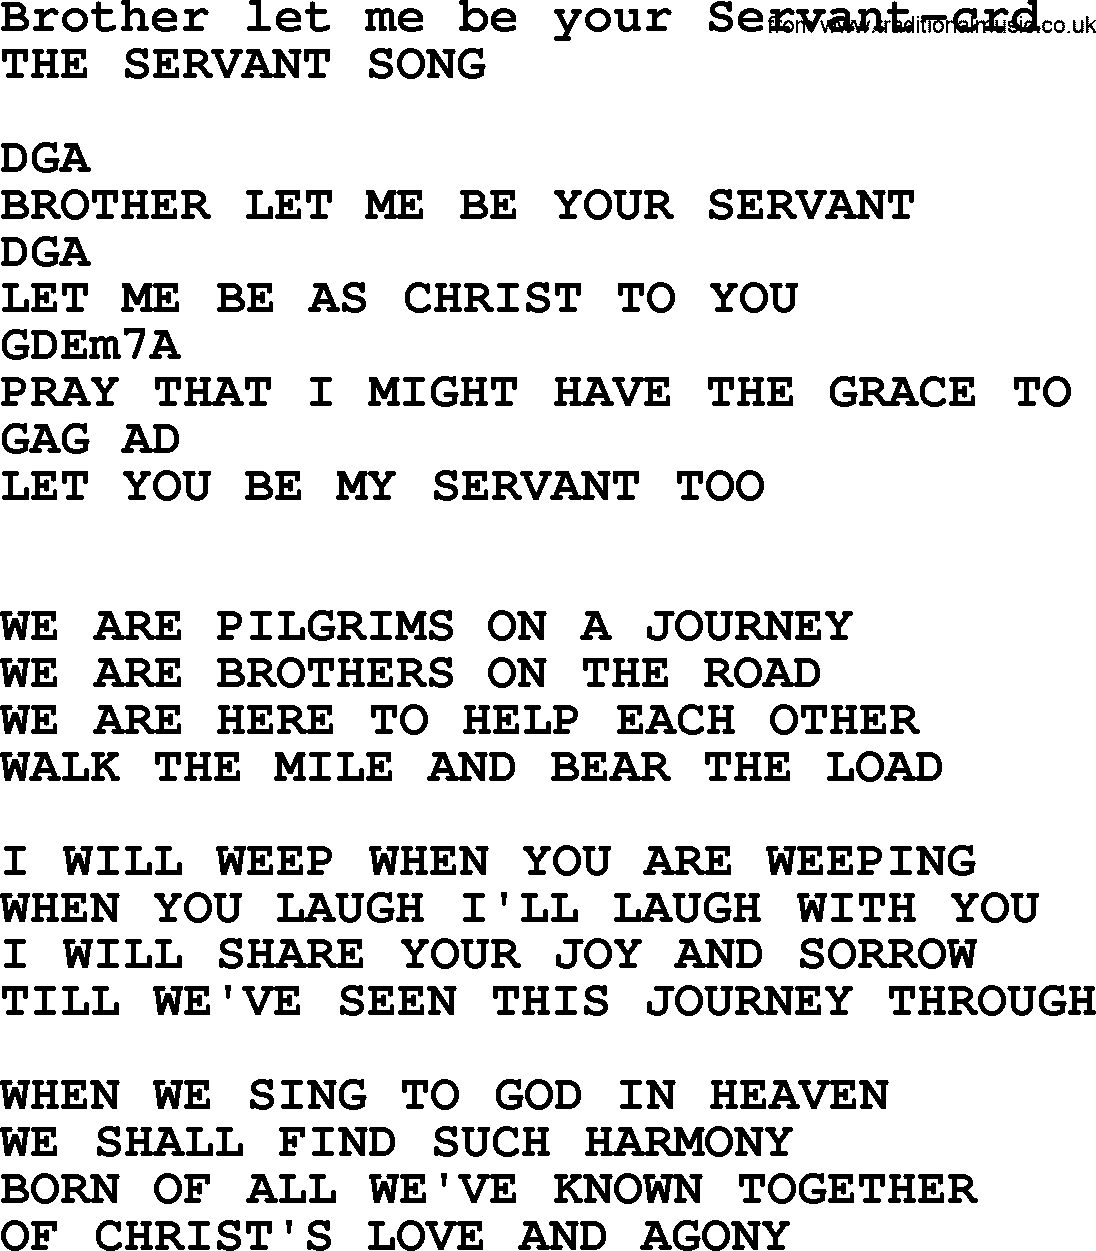 Top 500 Hymn: Brother Let Me Be Your Servant, lyrics and chords